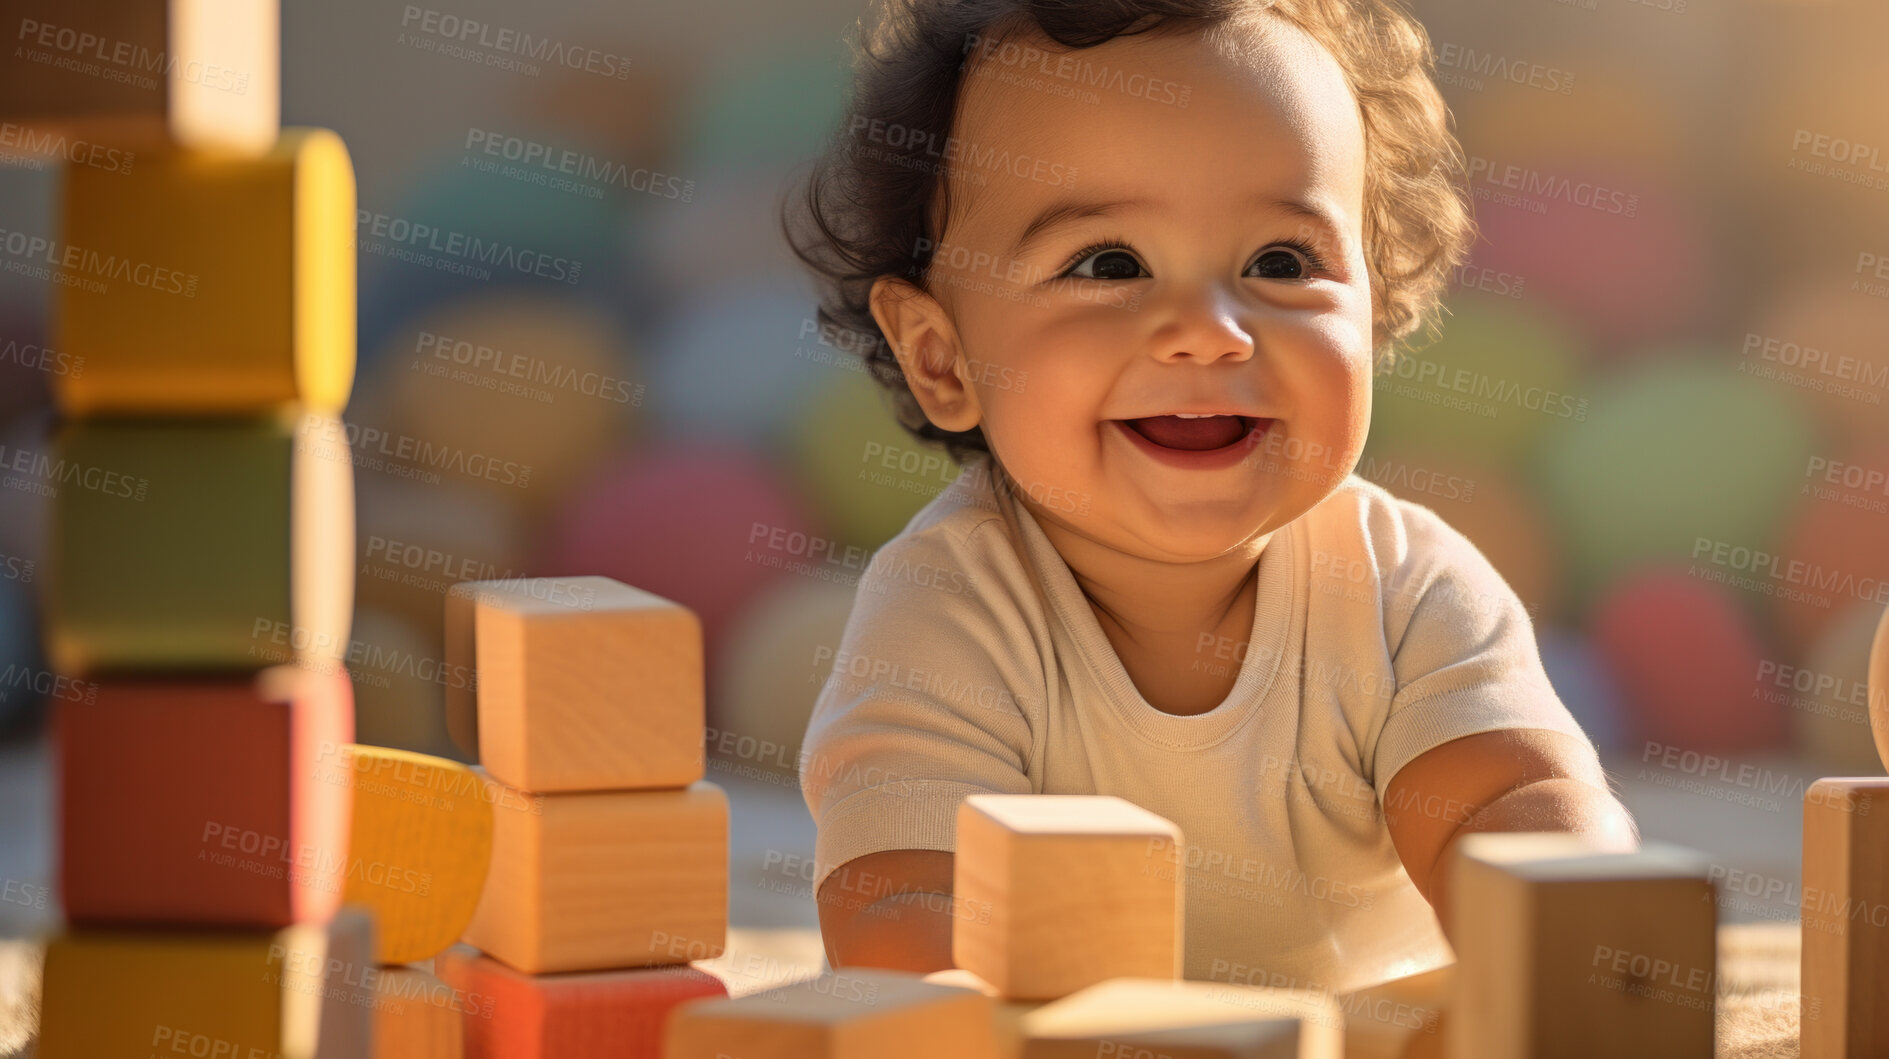 Buy stock photo Portrait of a happy toddler playing with building blocks at kindergarten or playroom.